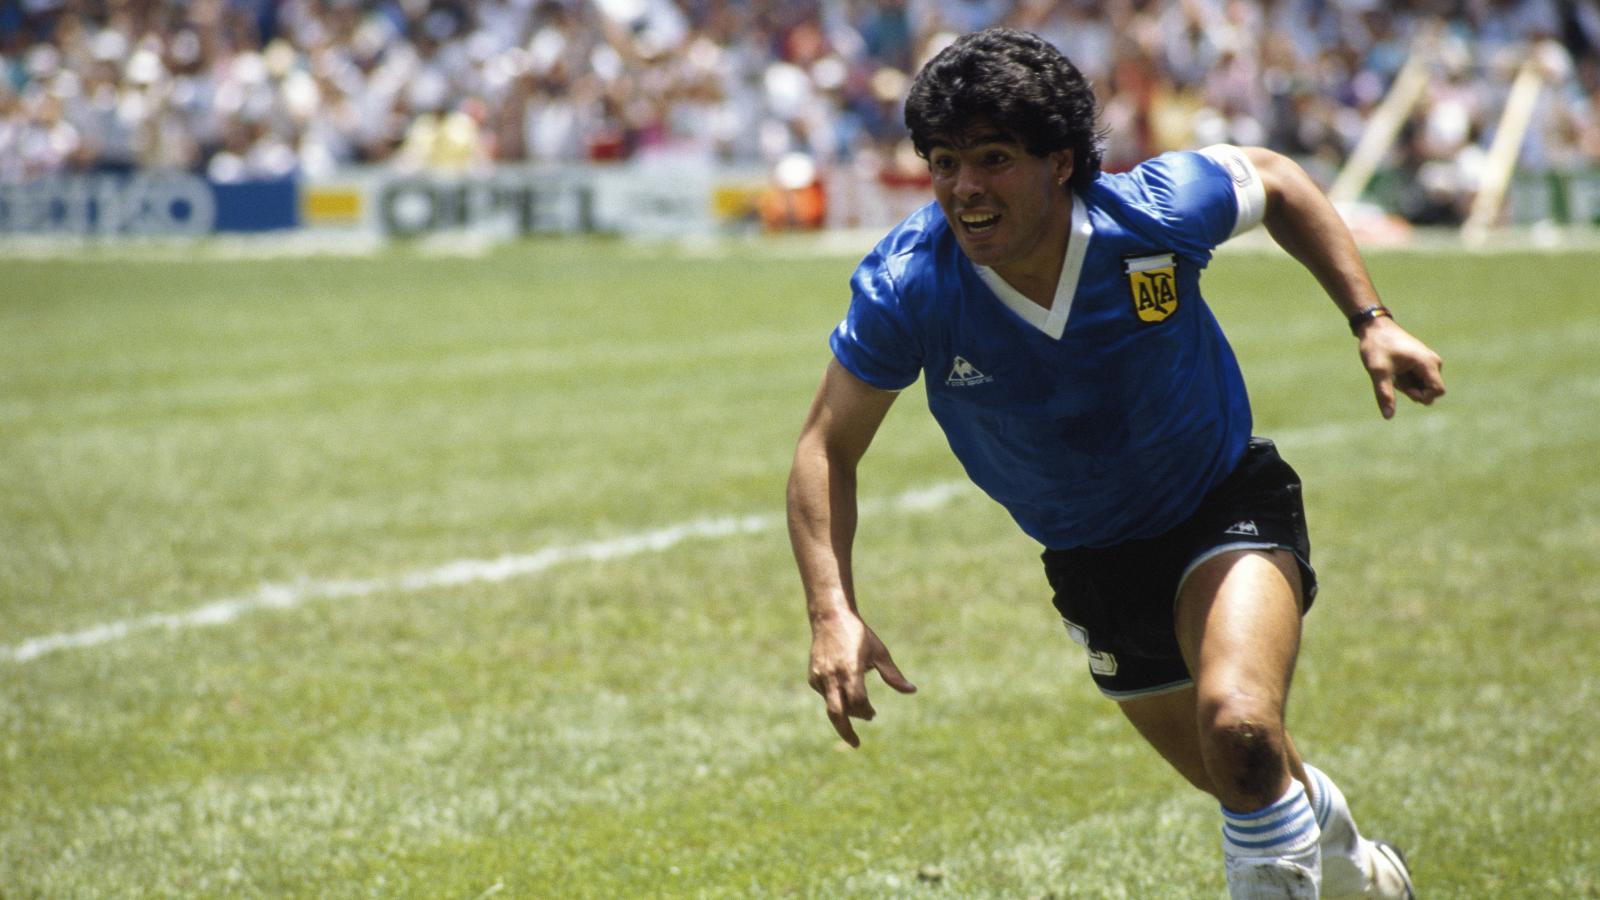 The story behind the jersey Diego Maradona wore 30 years ago for his “Hand of God” goal